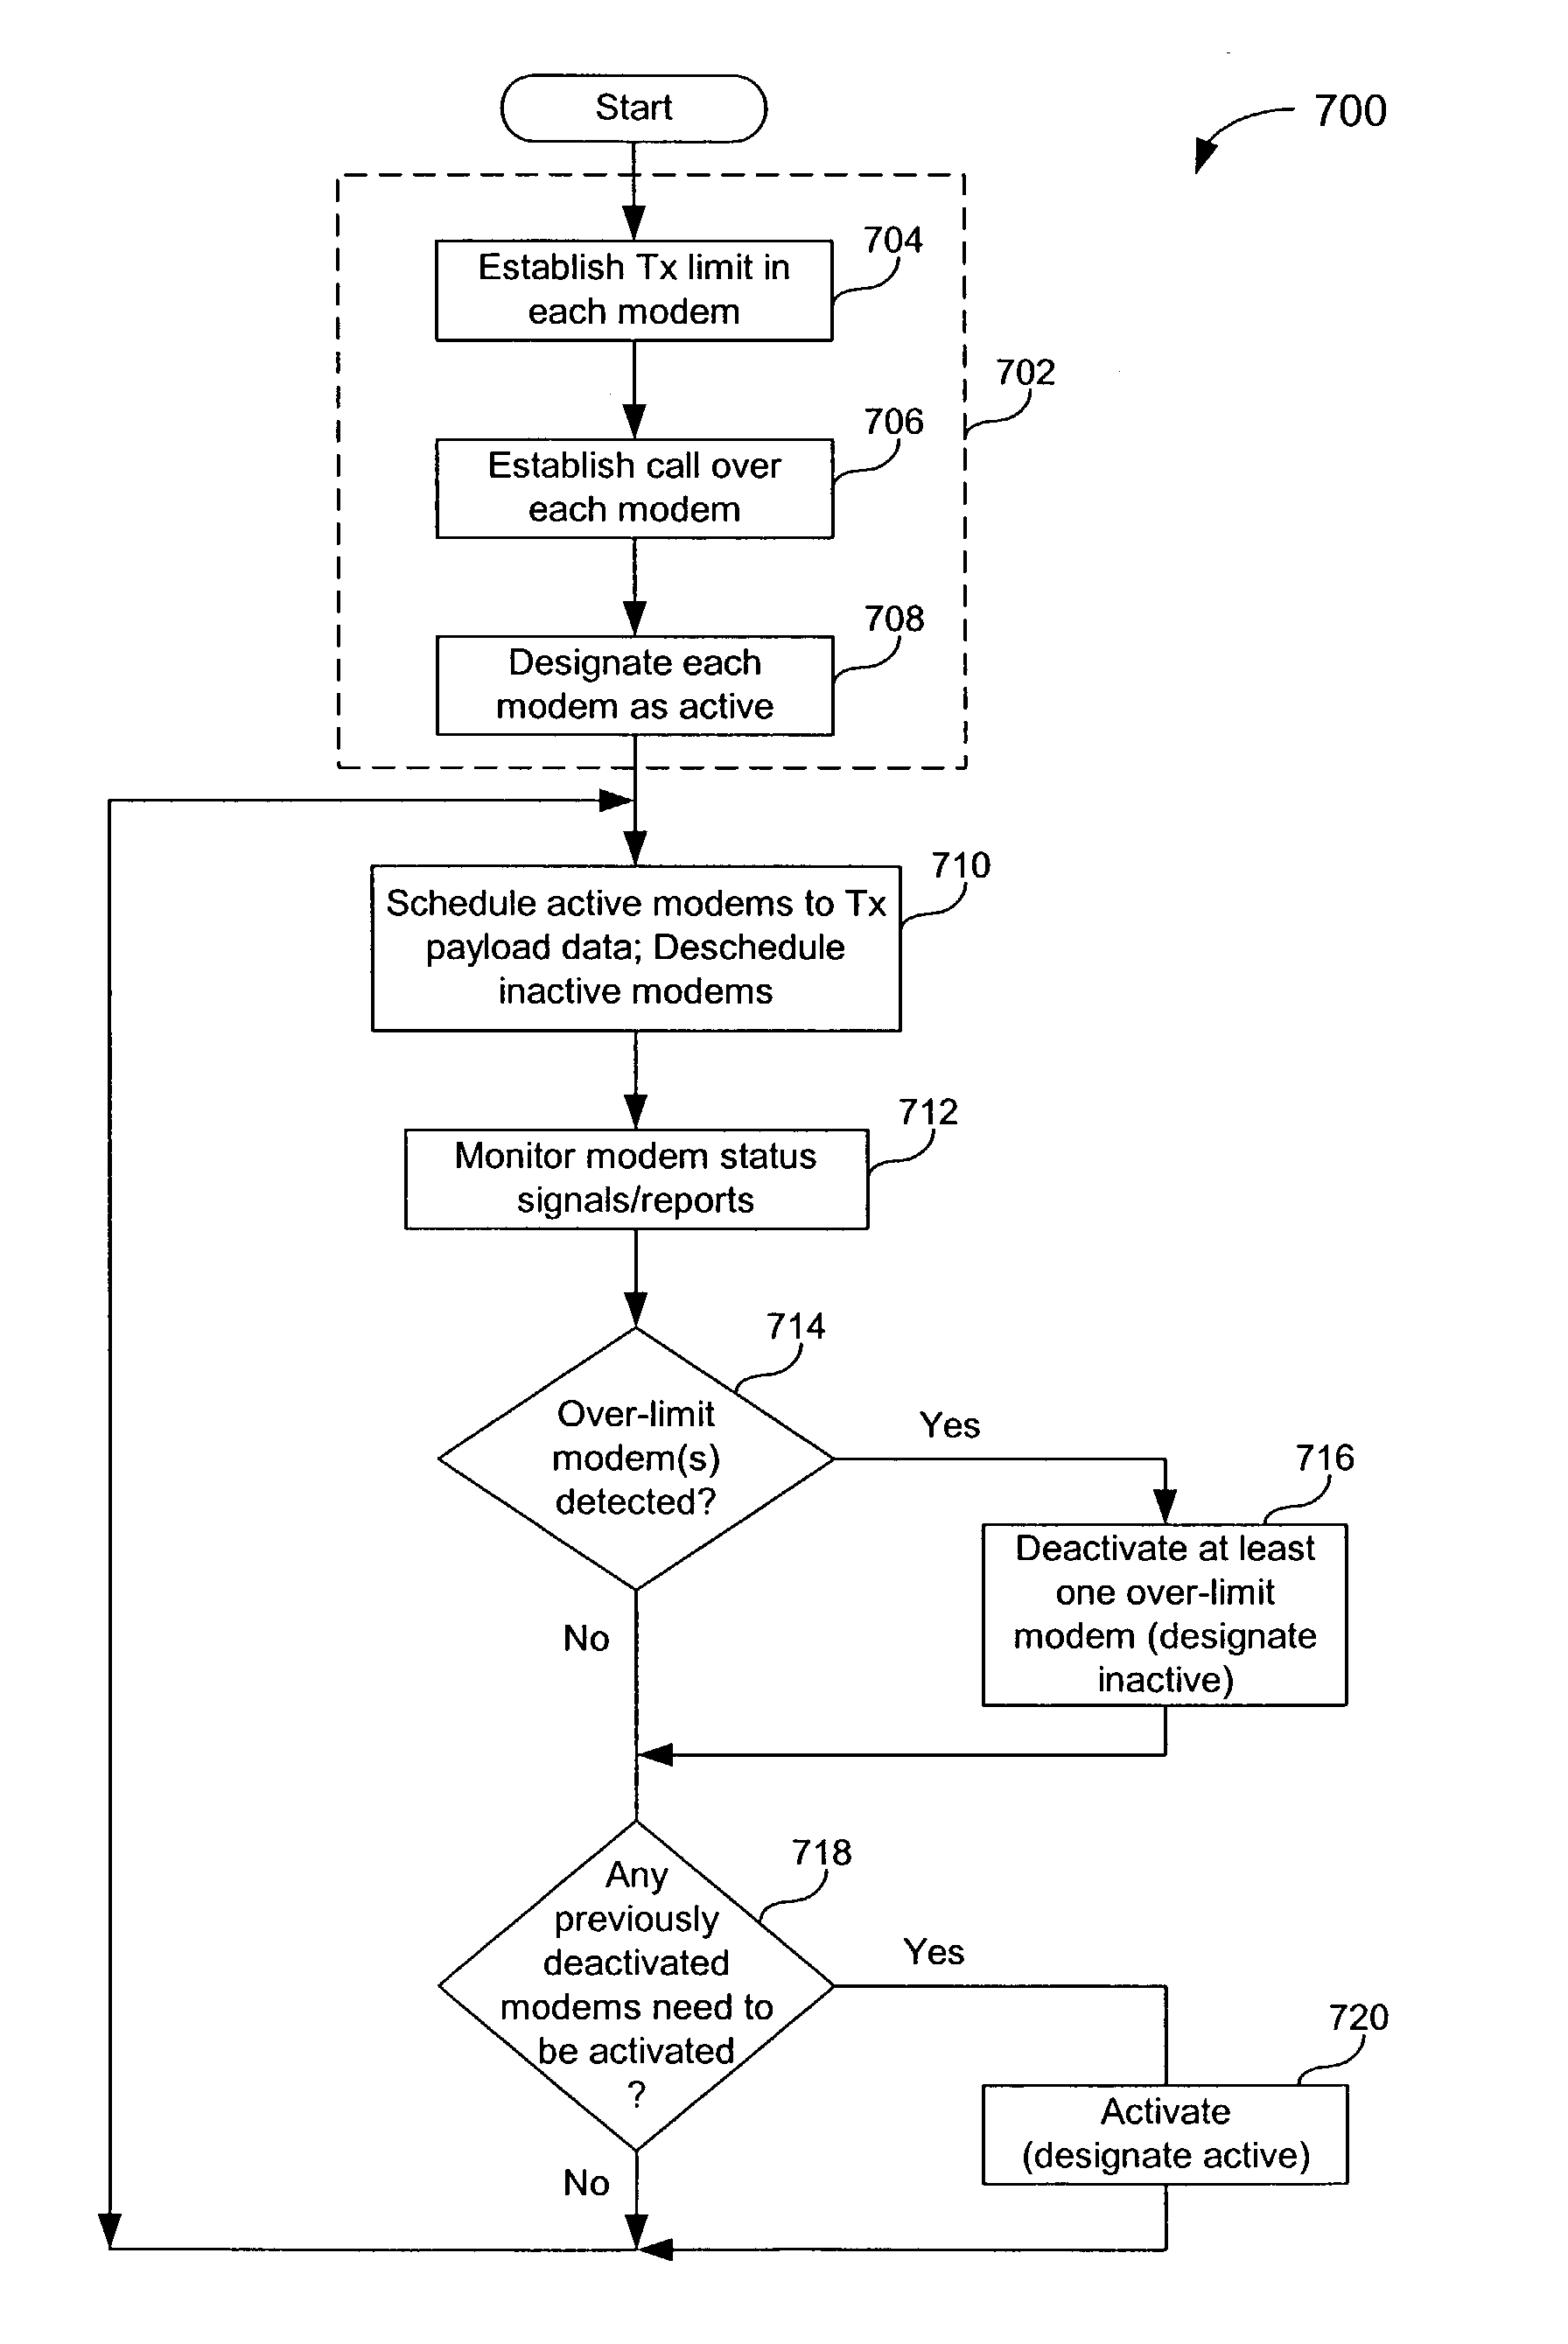 Wireless terminal operating under an aggregate transmit power limit using multiple modems having fixed individual transmit power limits